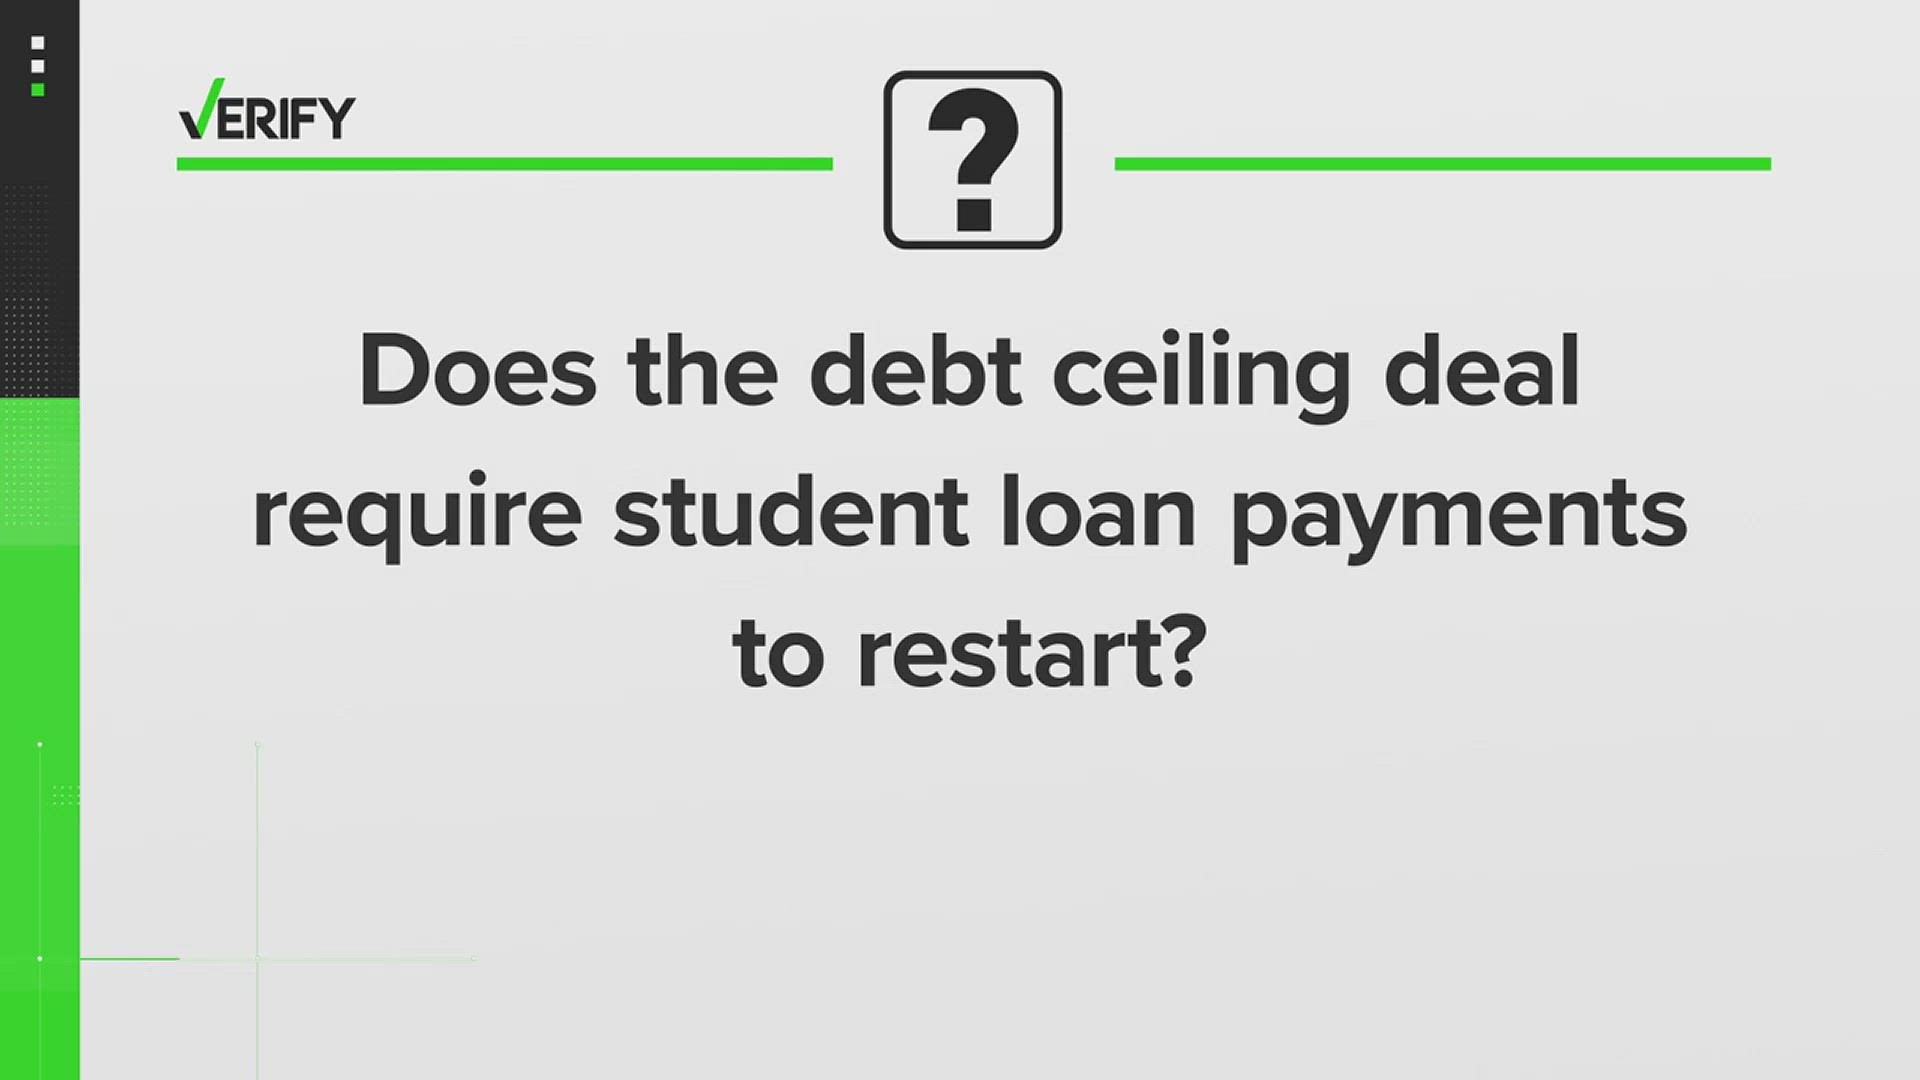 Several VERIFY readers asked what the proposed debt ceiling deal means for their student loan payments. Here’s what borrowers need to know.